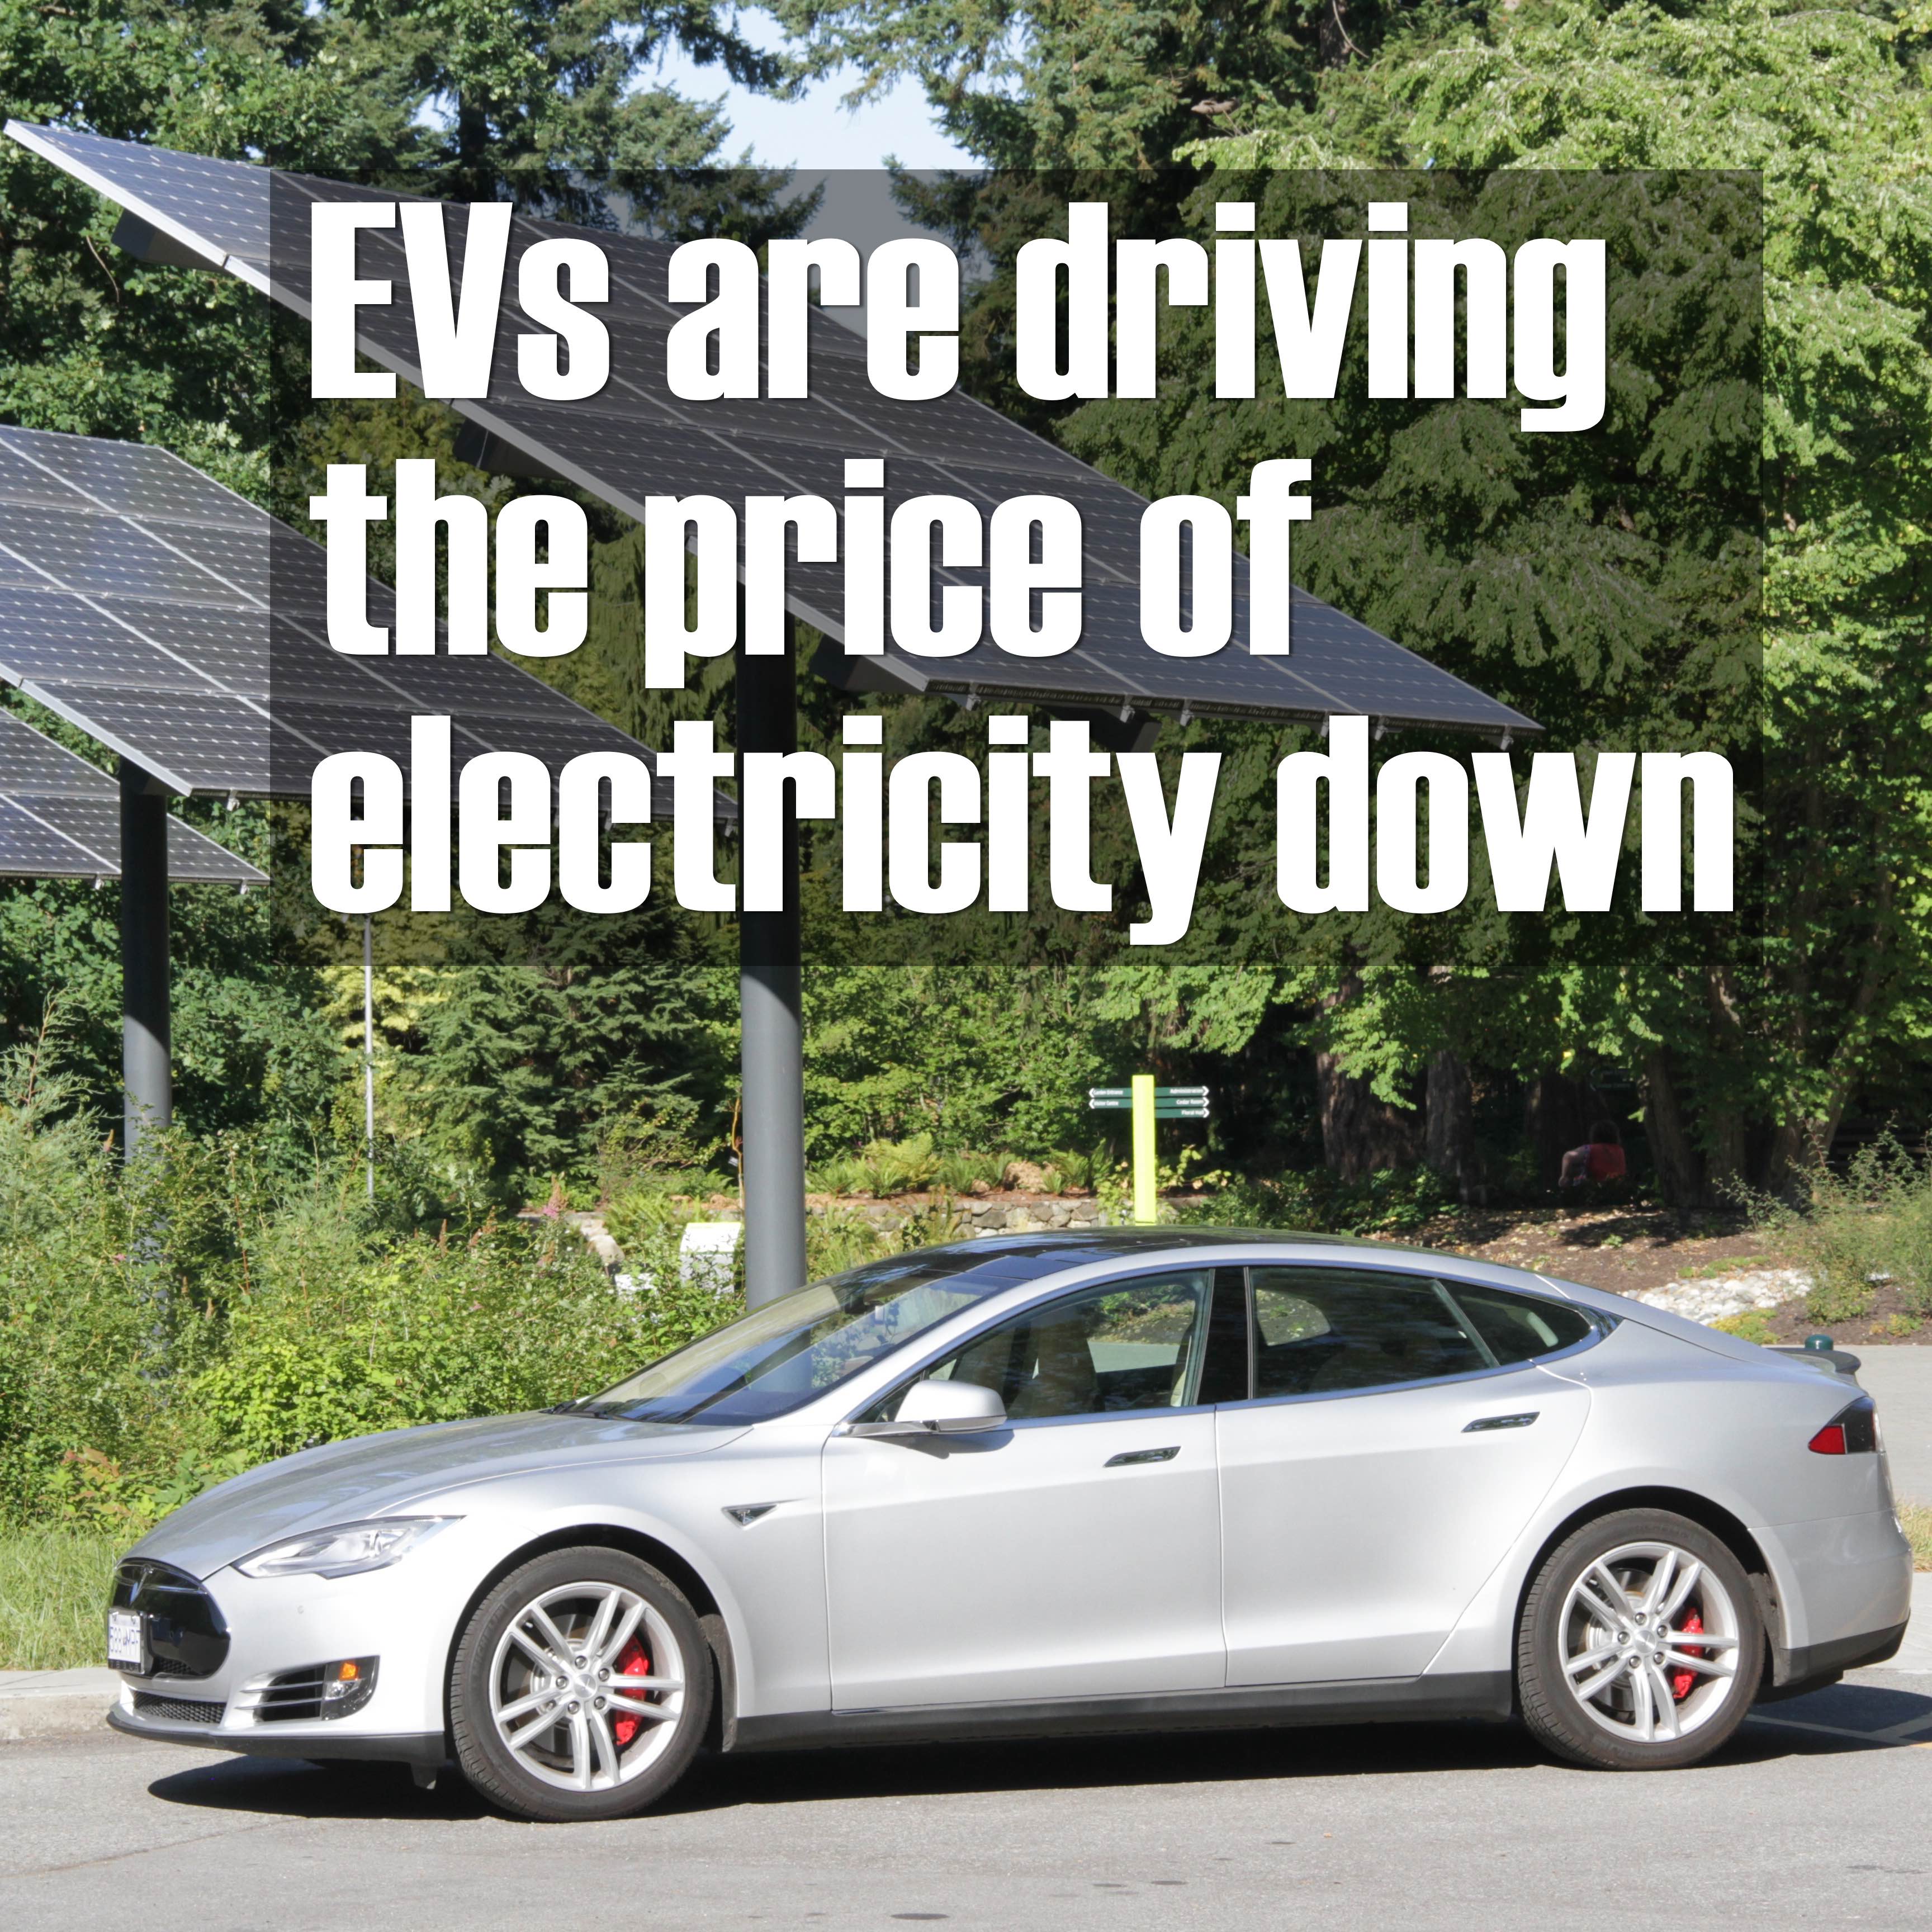 EVs are driving the price of electricity down.